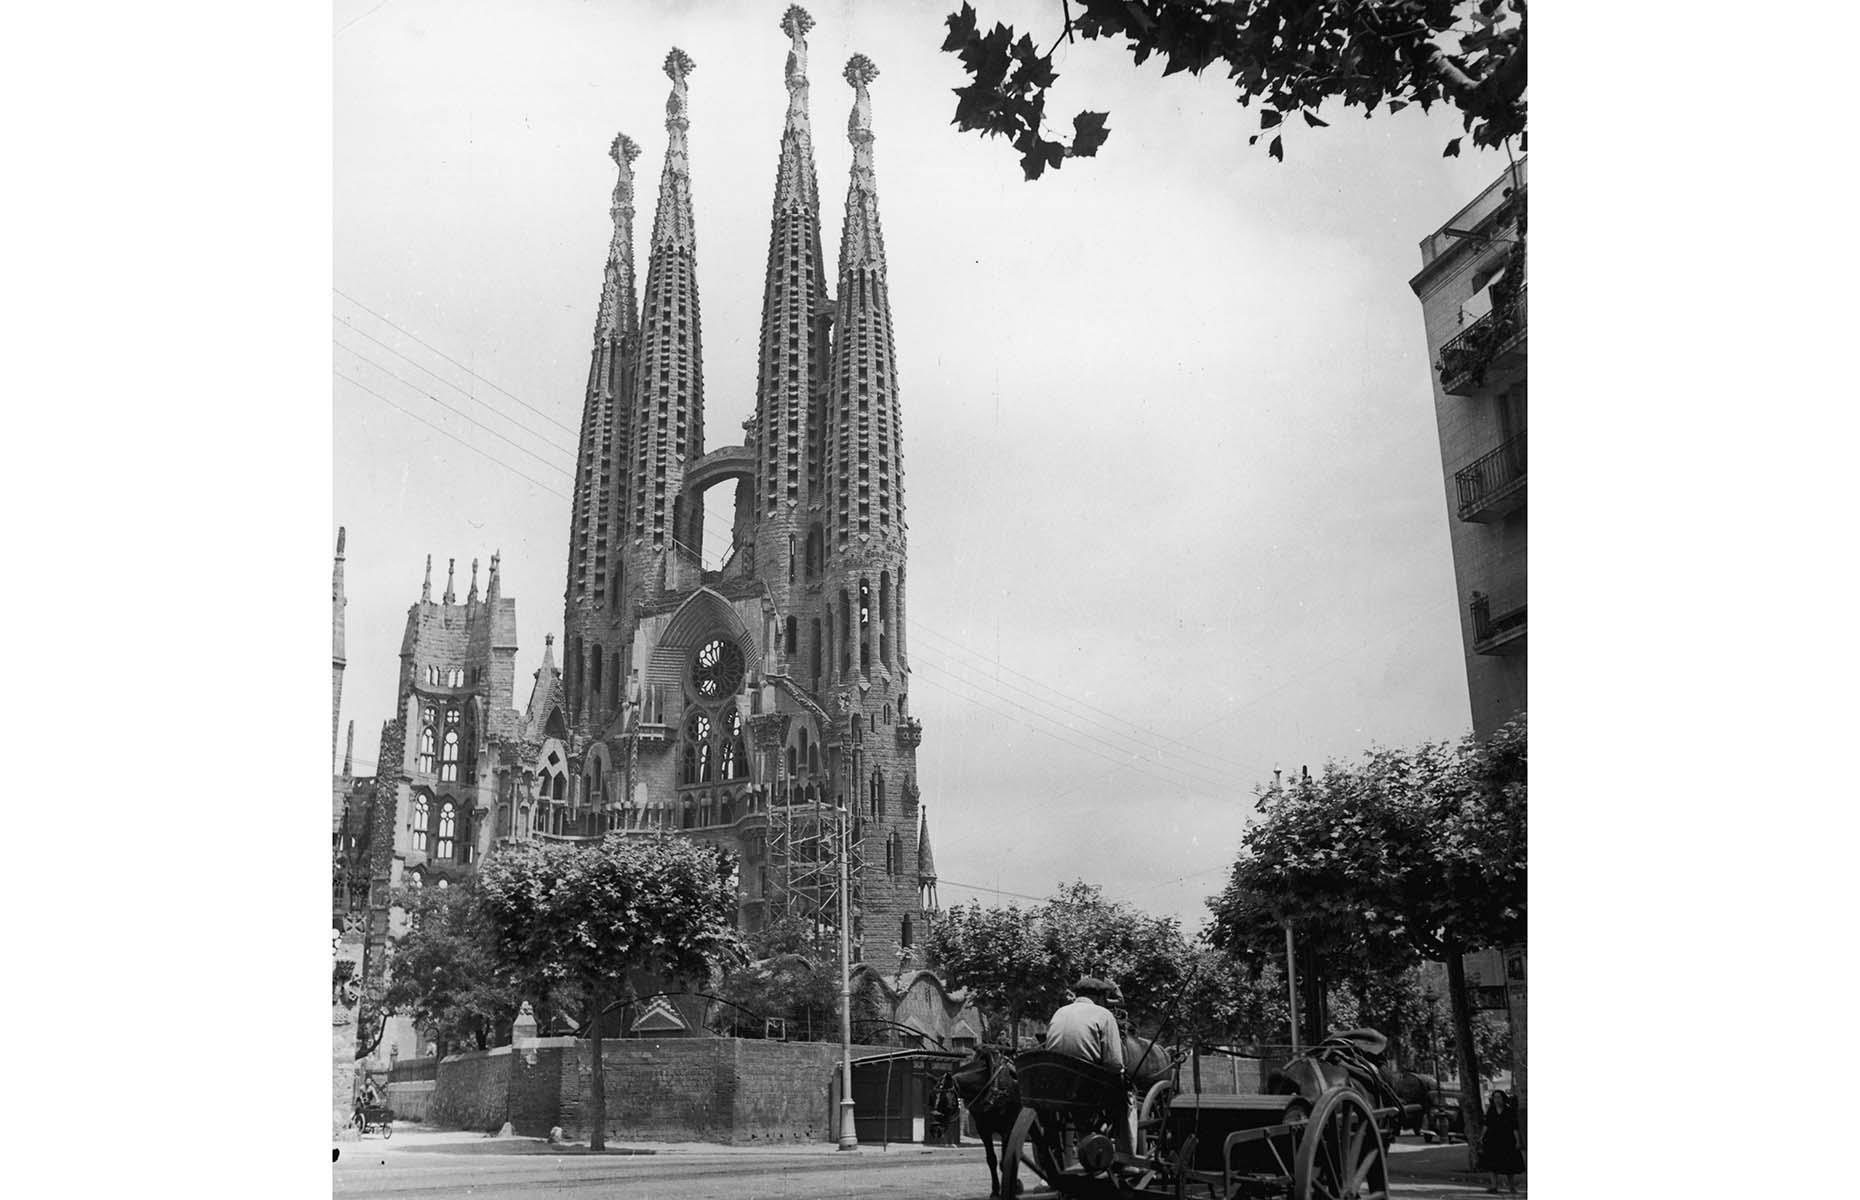 Back on the Spanish mainland, Barcelona became popular as a vacation destination among wealthy Europeans following the World's Fair in 1888. Although the Spanish Civil War and both World Wars halted the growth of tourism, the city came back with a boom in the 1950s. One of the city's most striking landmarks, Sagrada Família, had grown quite considerably by that time as well, attracting many visitors eager to see the impressive and unusual cathedral. Here, it's pictured in 1954.